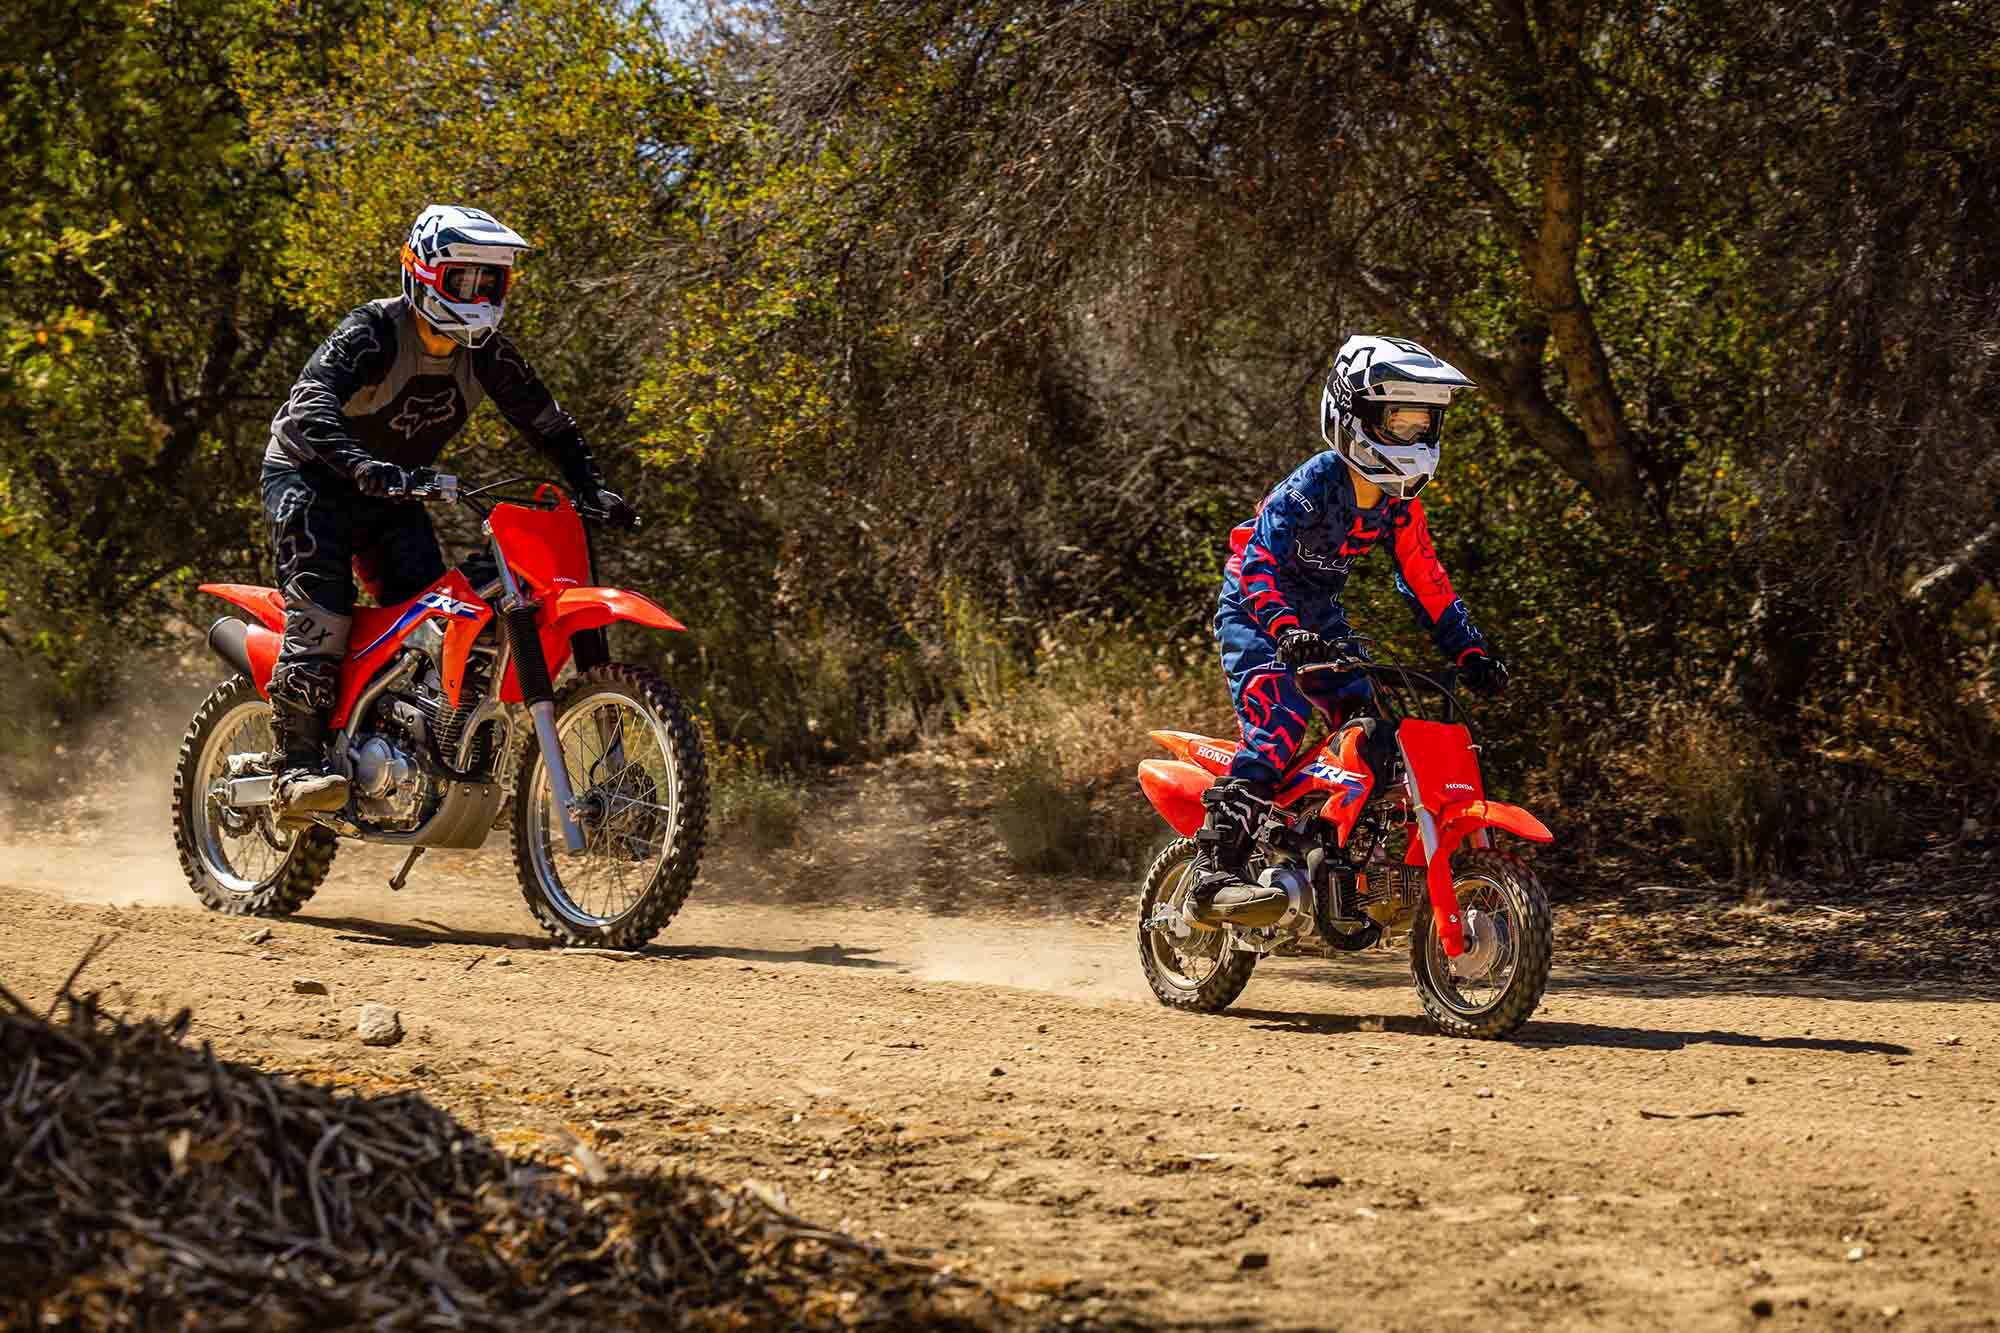 The smallest bikes are great starting points for young kids who are just learning to ride.